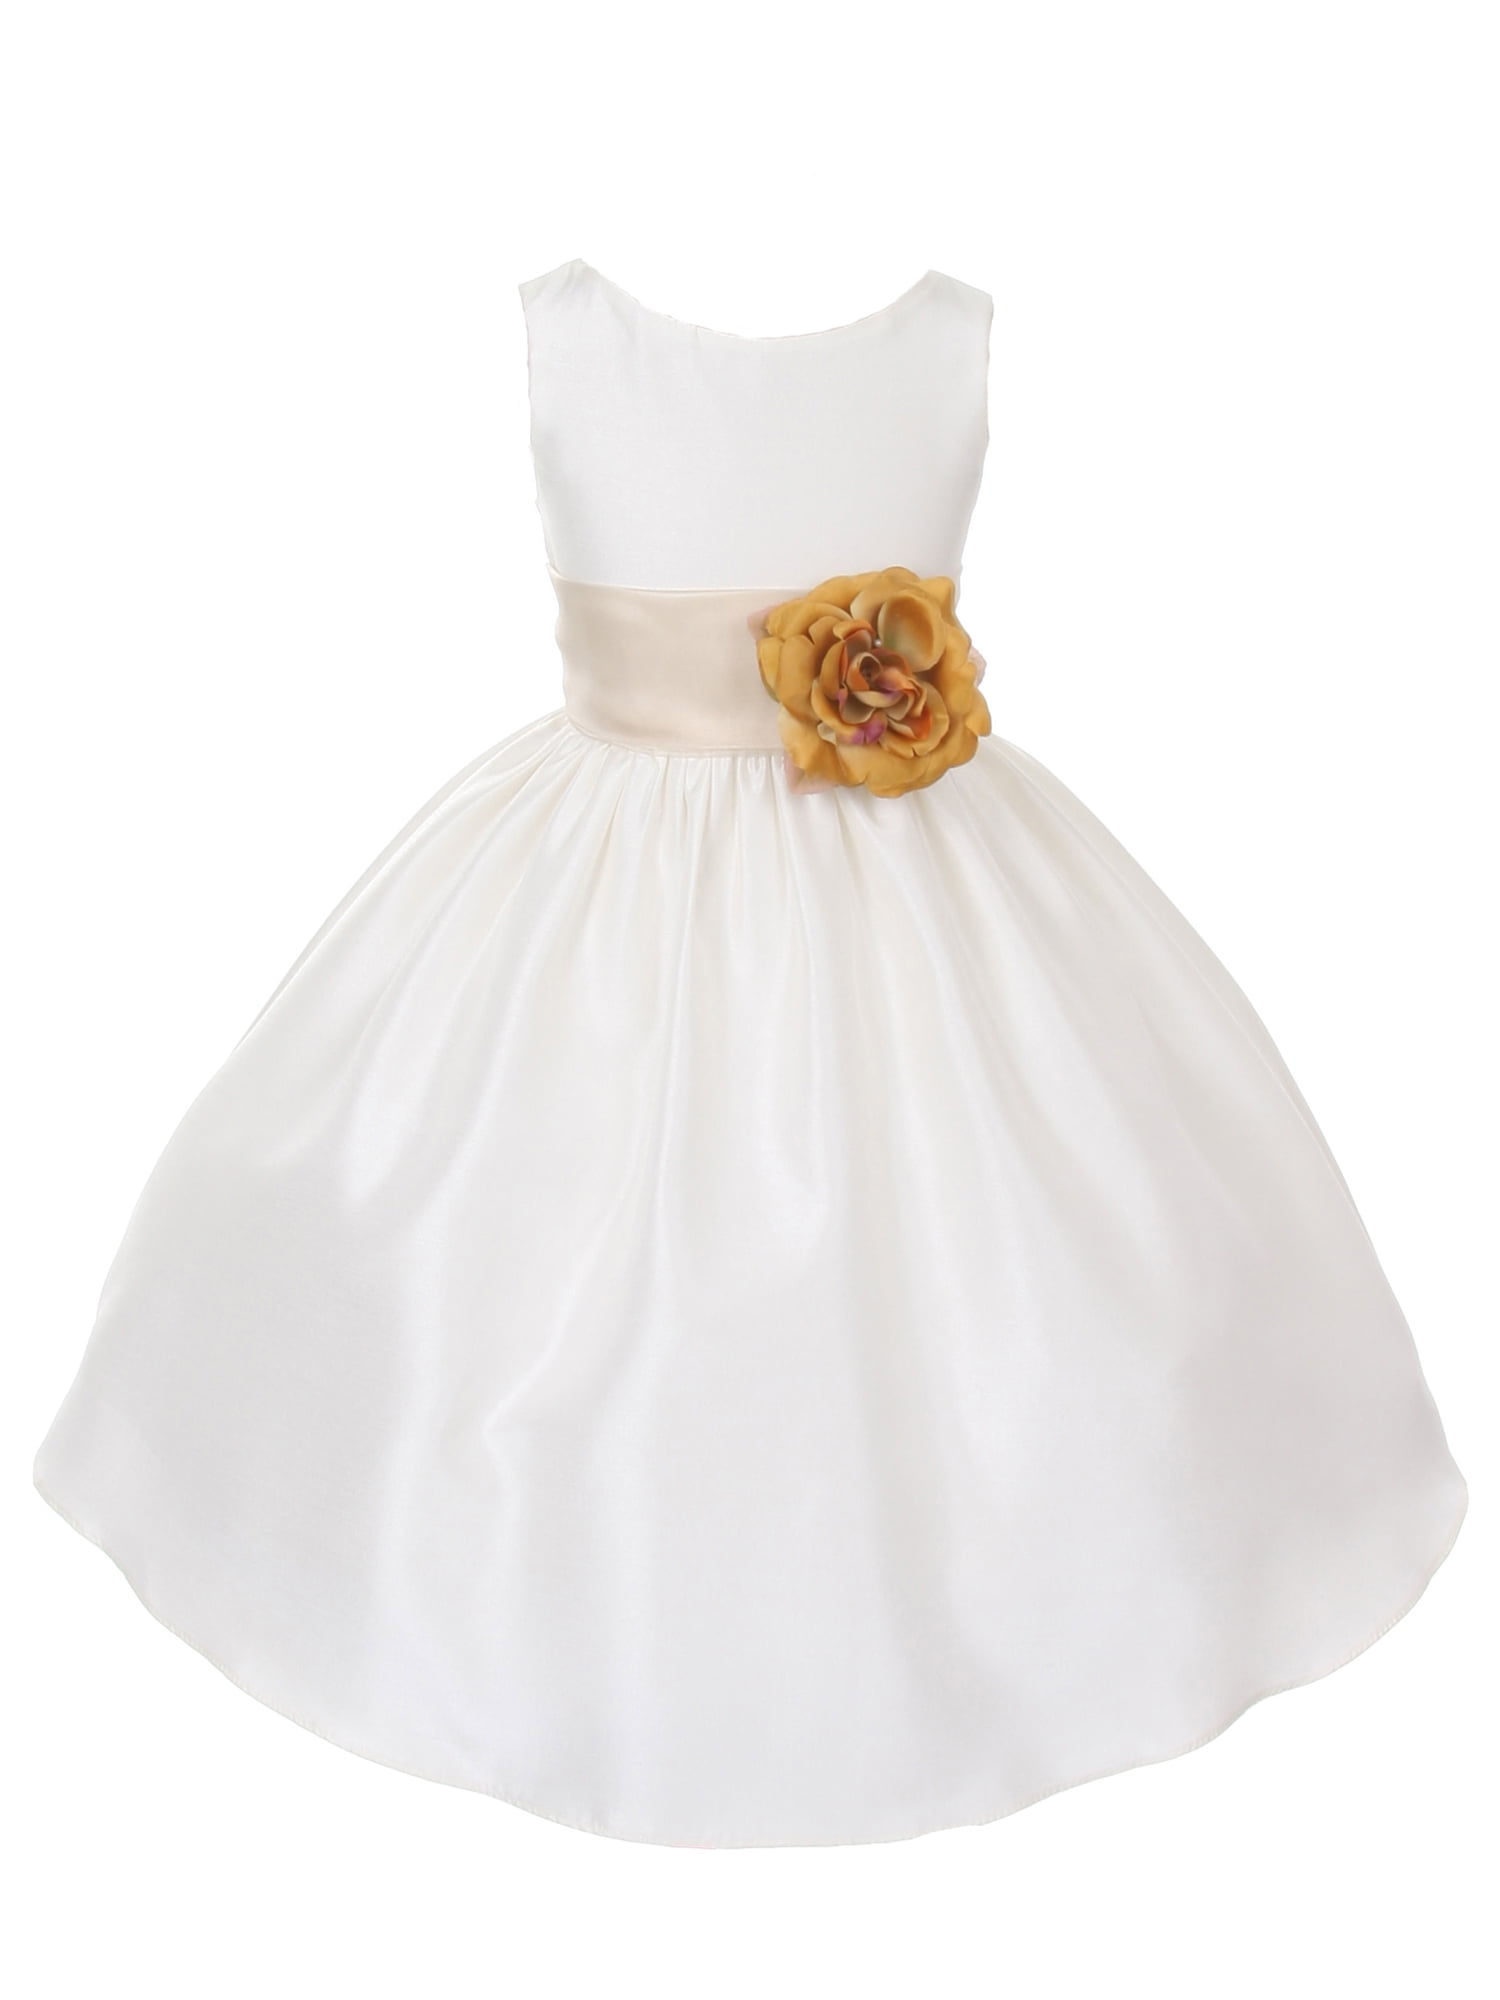 Dempsey Marie Poly Silk Flower Girl Dress with Colorful Sash 